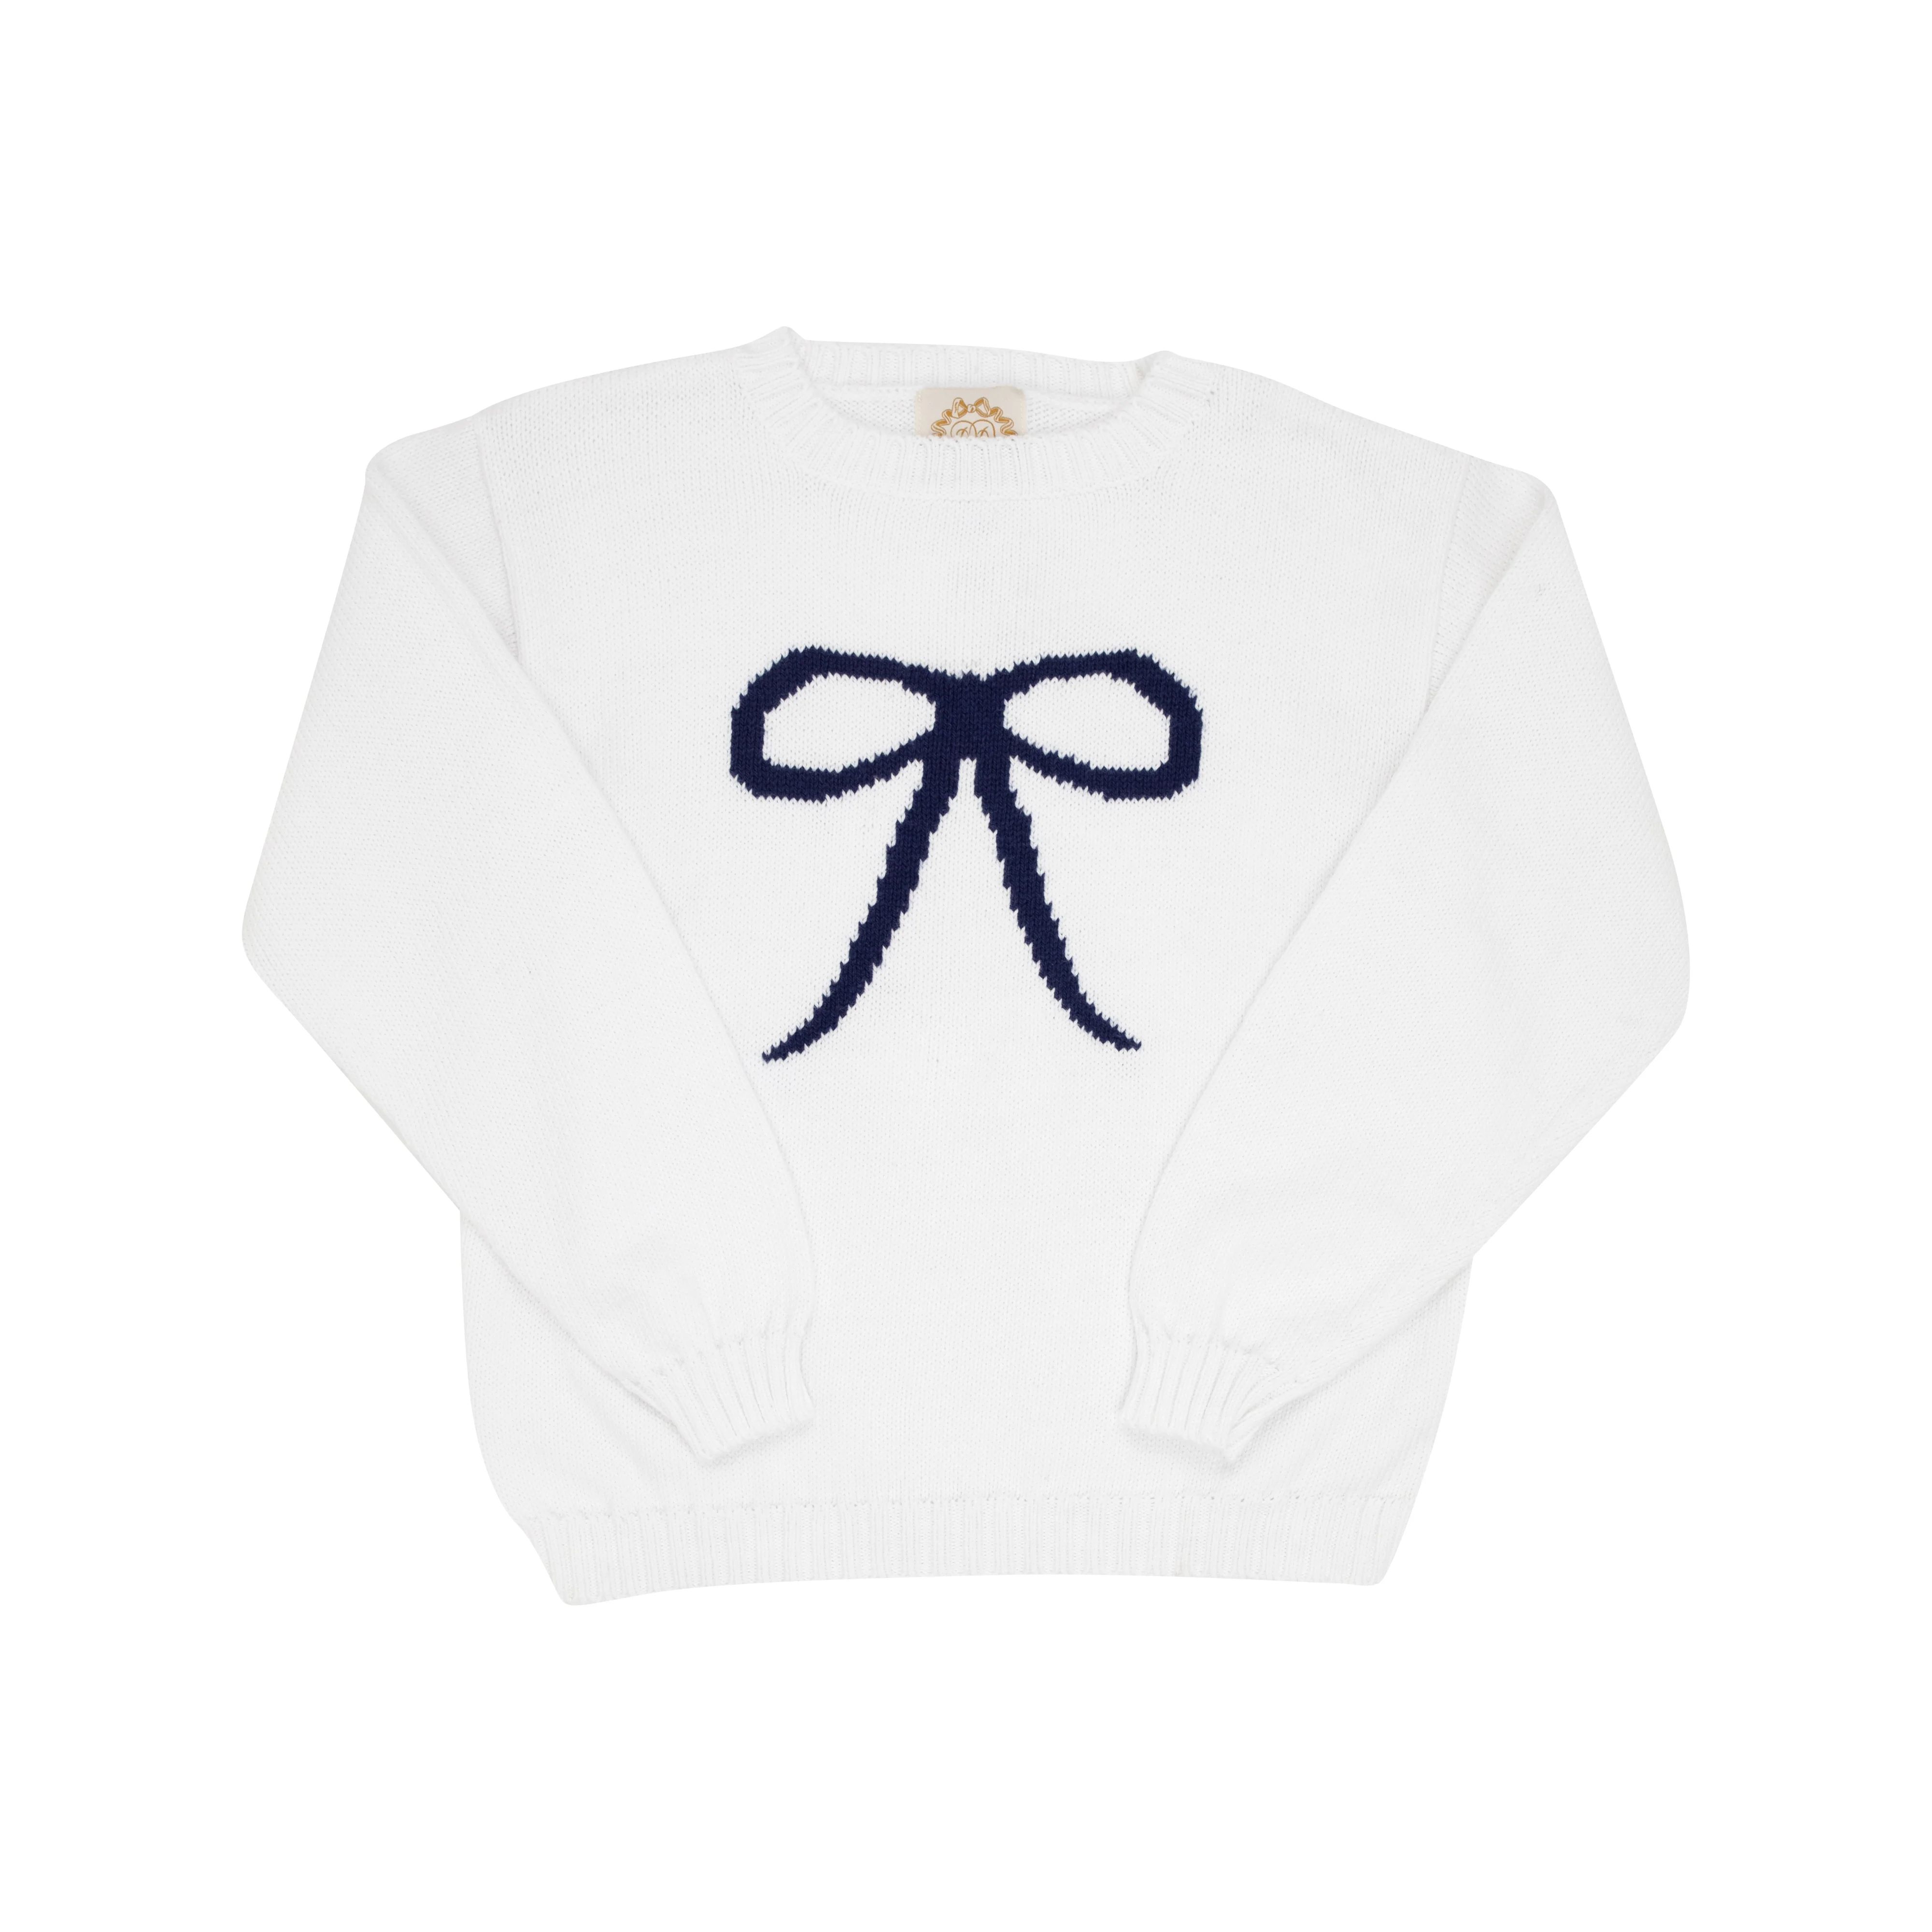 Isabelle's Intarsia Sweater - Worth Avenue White with Nantucket Navy Bow Intarsia | The Beaufort Bonnet Company